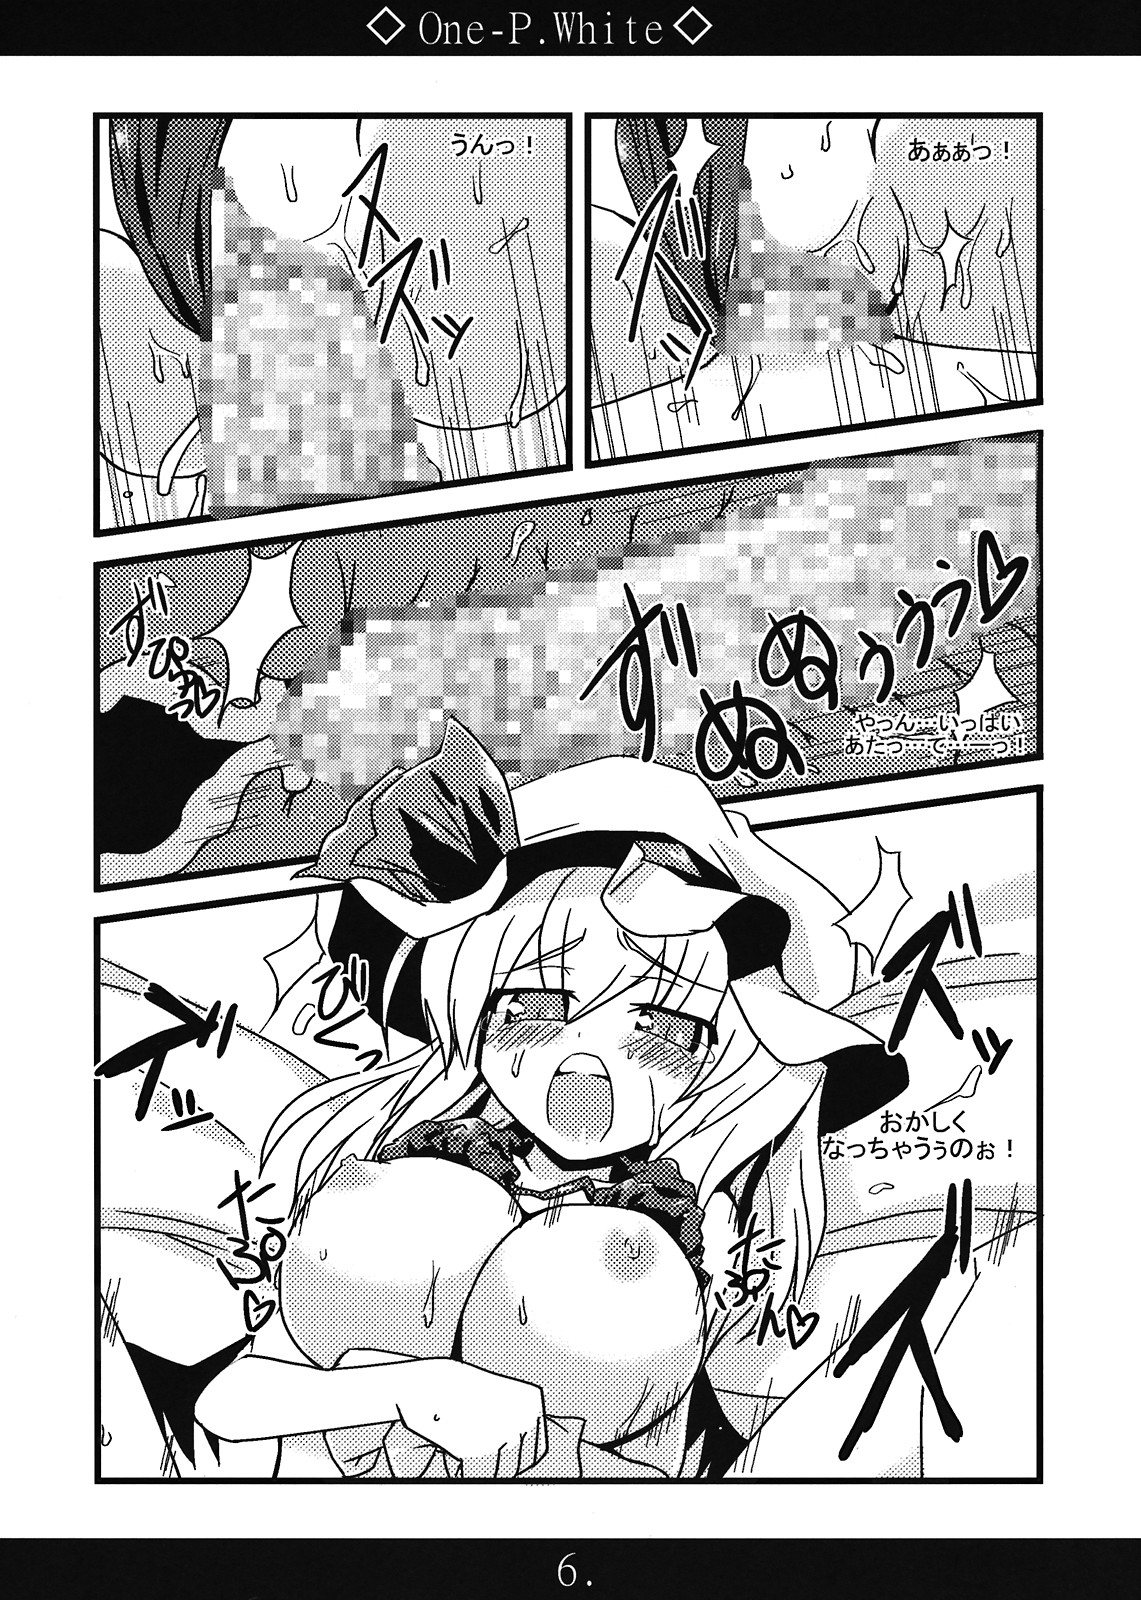 [MarineSapphire (Hasumi Milk)] One-P.White (Touhou Project) page 6 full